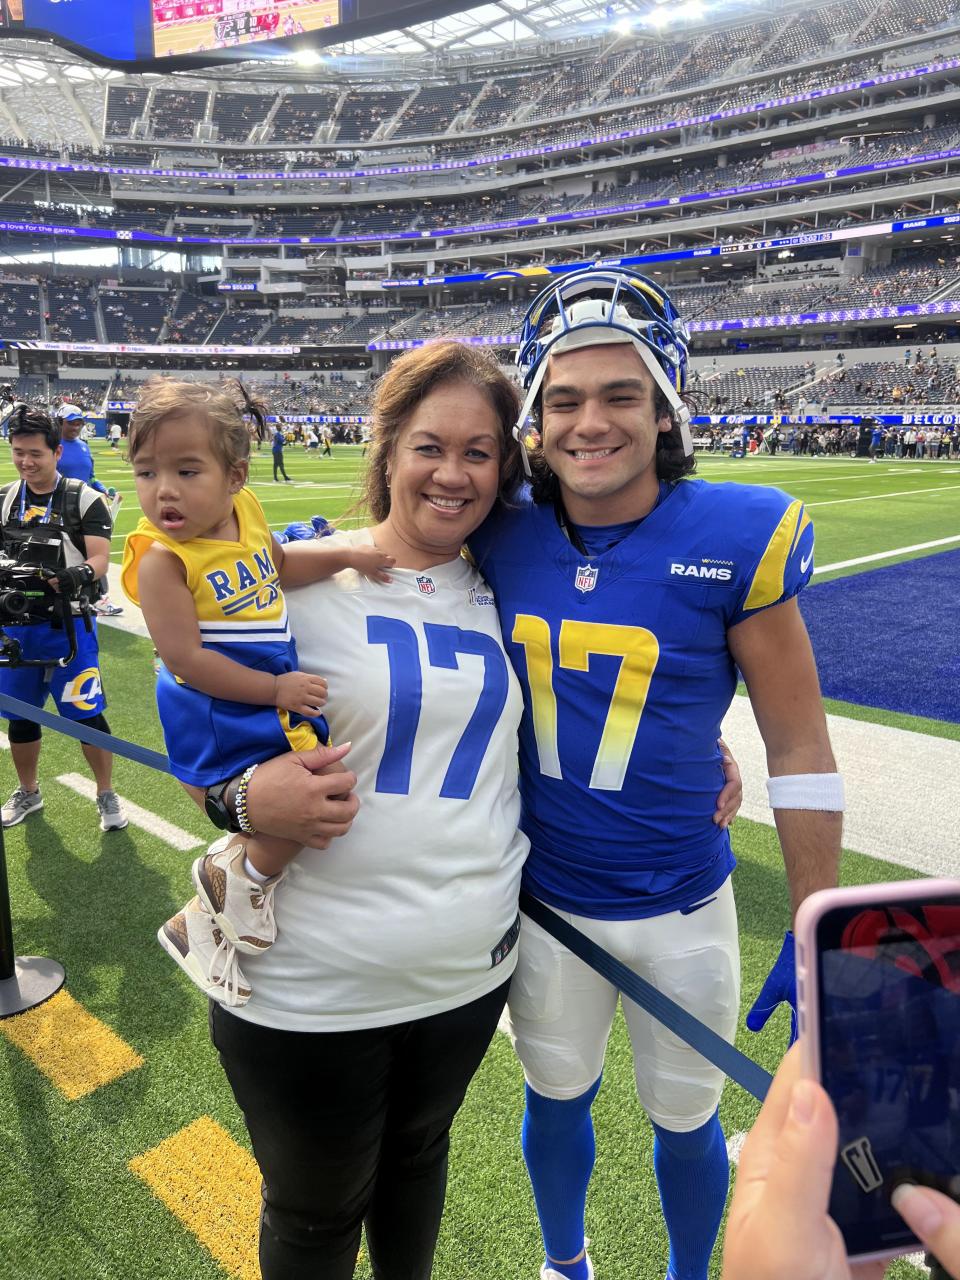 Rams receiver Puka Nacua poses for a picture with his mom, Penina, and her granddaughter, Coco Laulile, at SoFi Stadium in Los Angeles. It was the first NFL game Penina had ever attended. | Nacua family